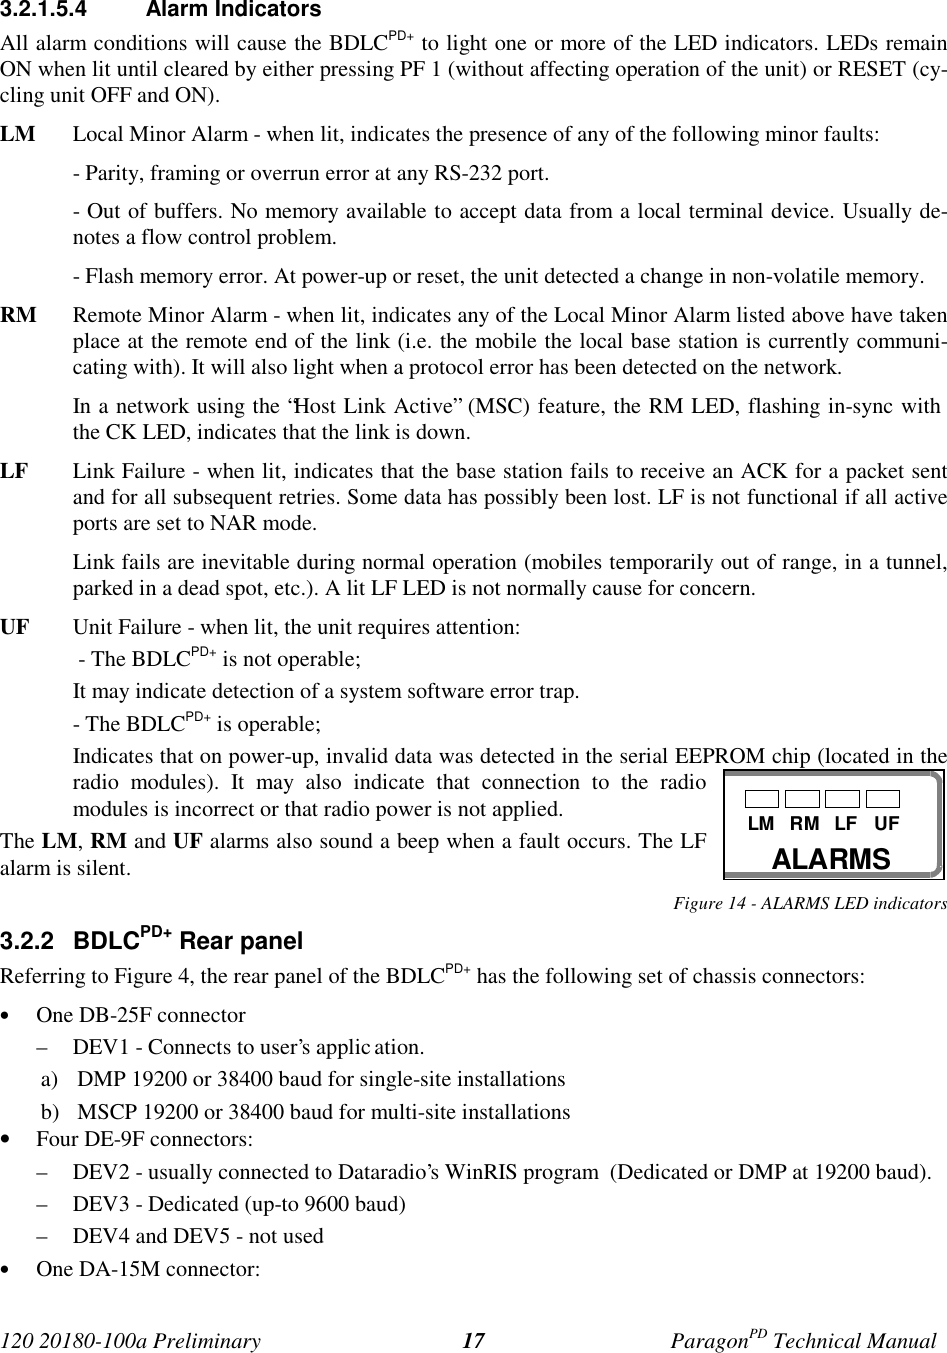 Page 24 of CalAmp Wireless Networks BDD4T85-1 Paragon/PD User Manual Parg PD  T100a Prelim